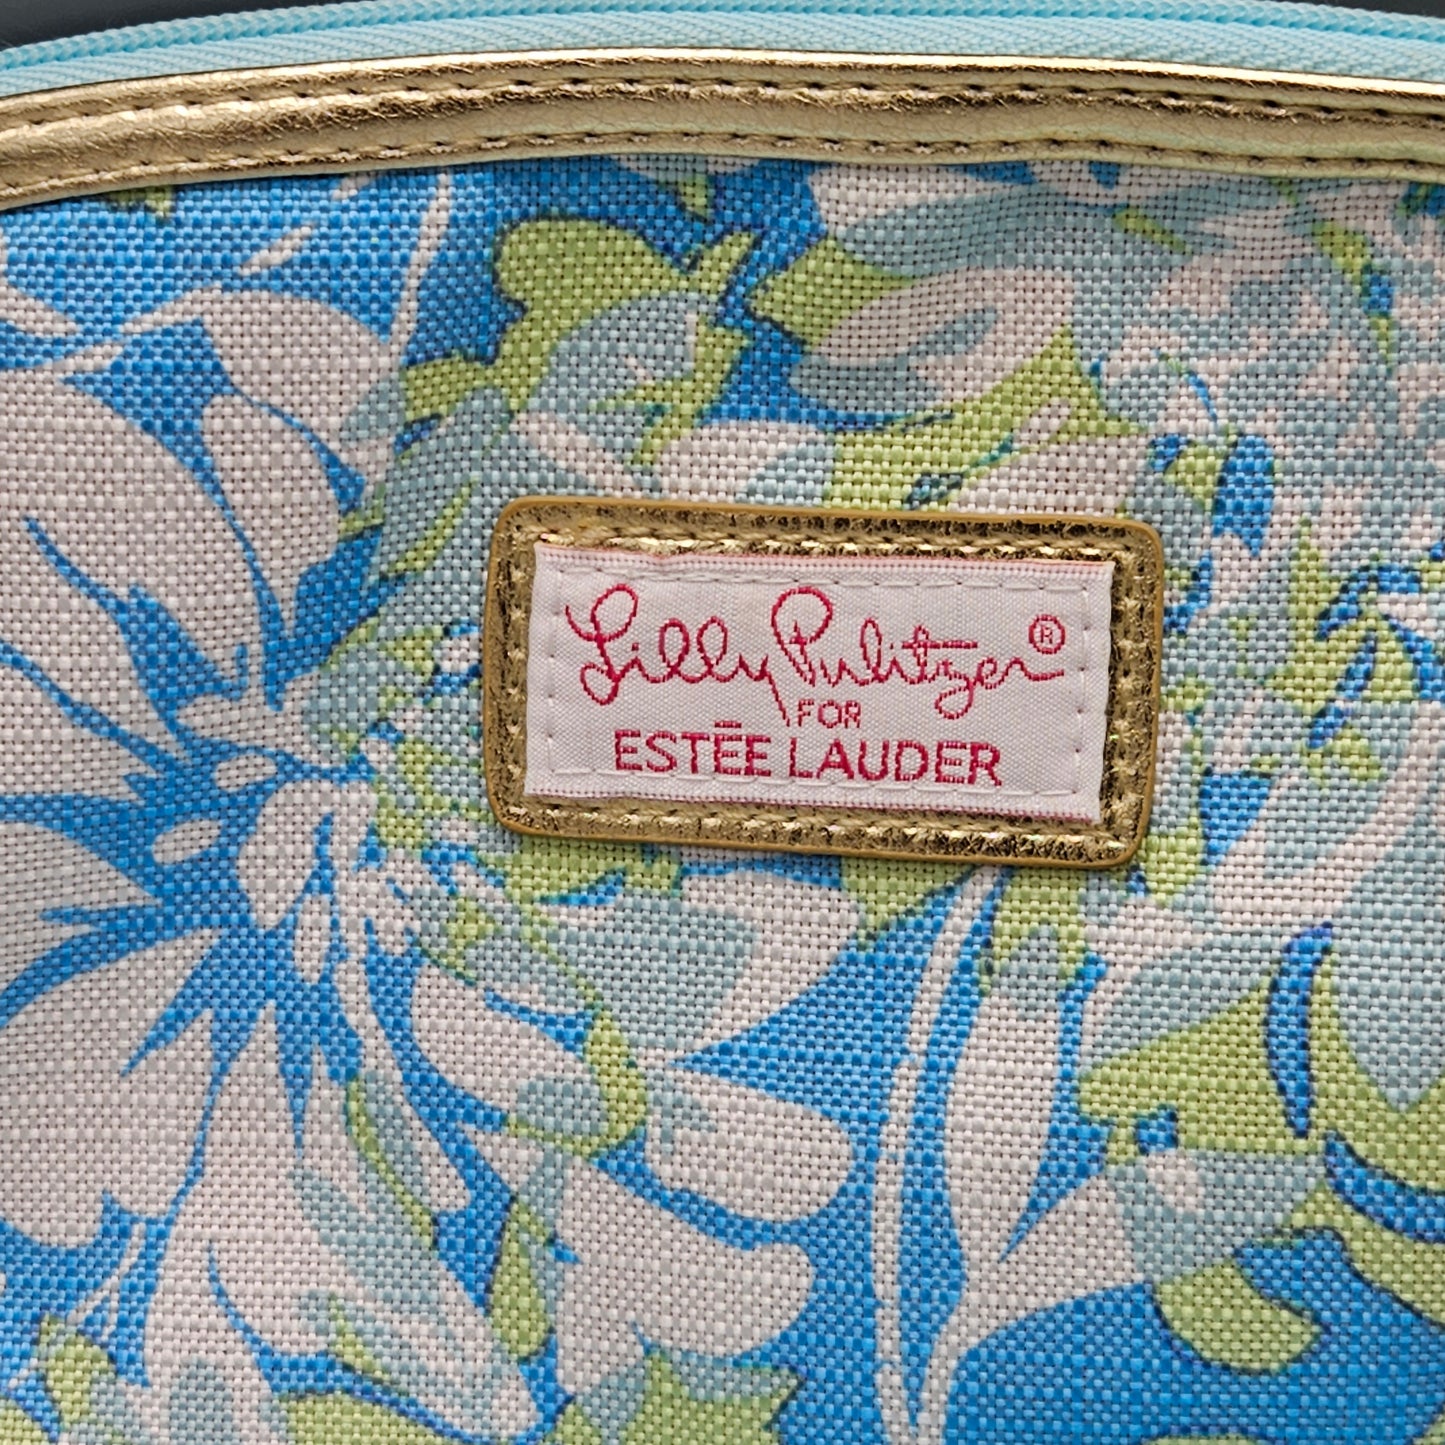 Lilly Pullitzer for Estee Lauder Bag